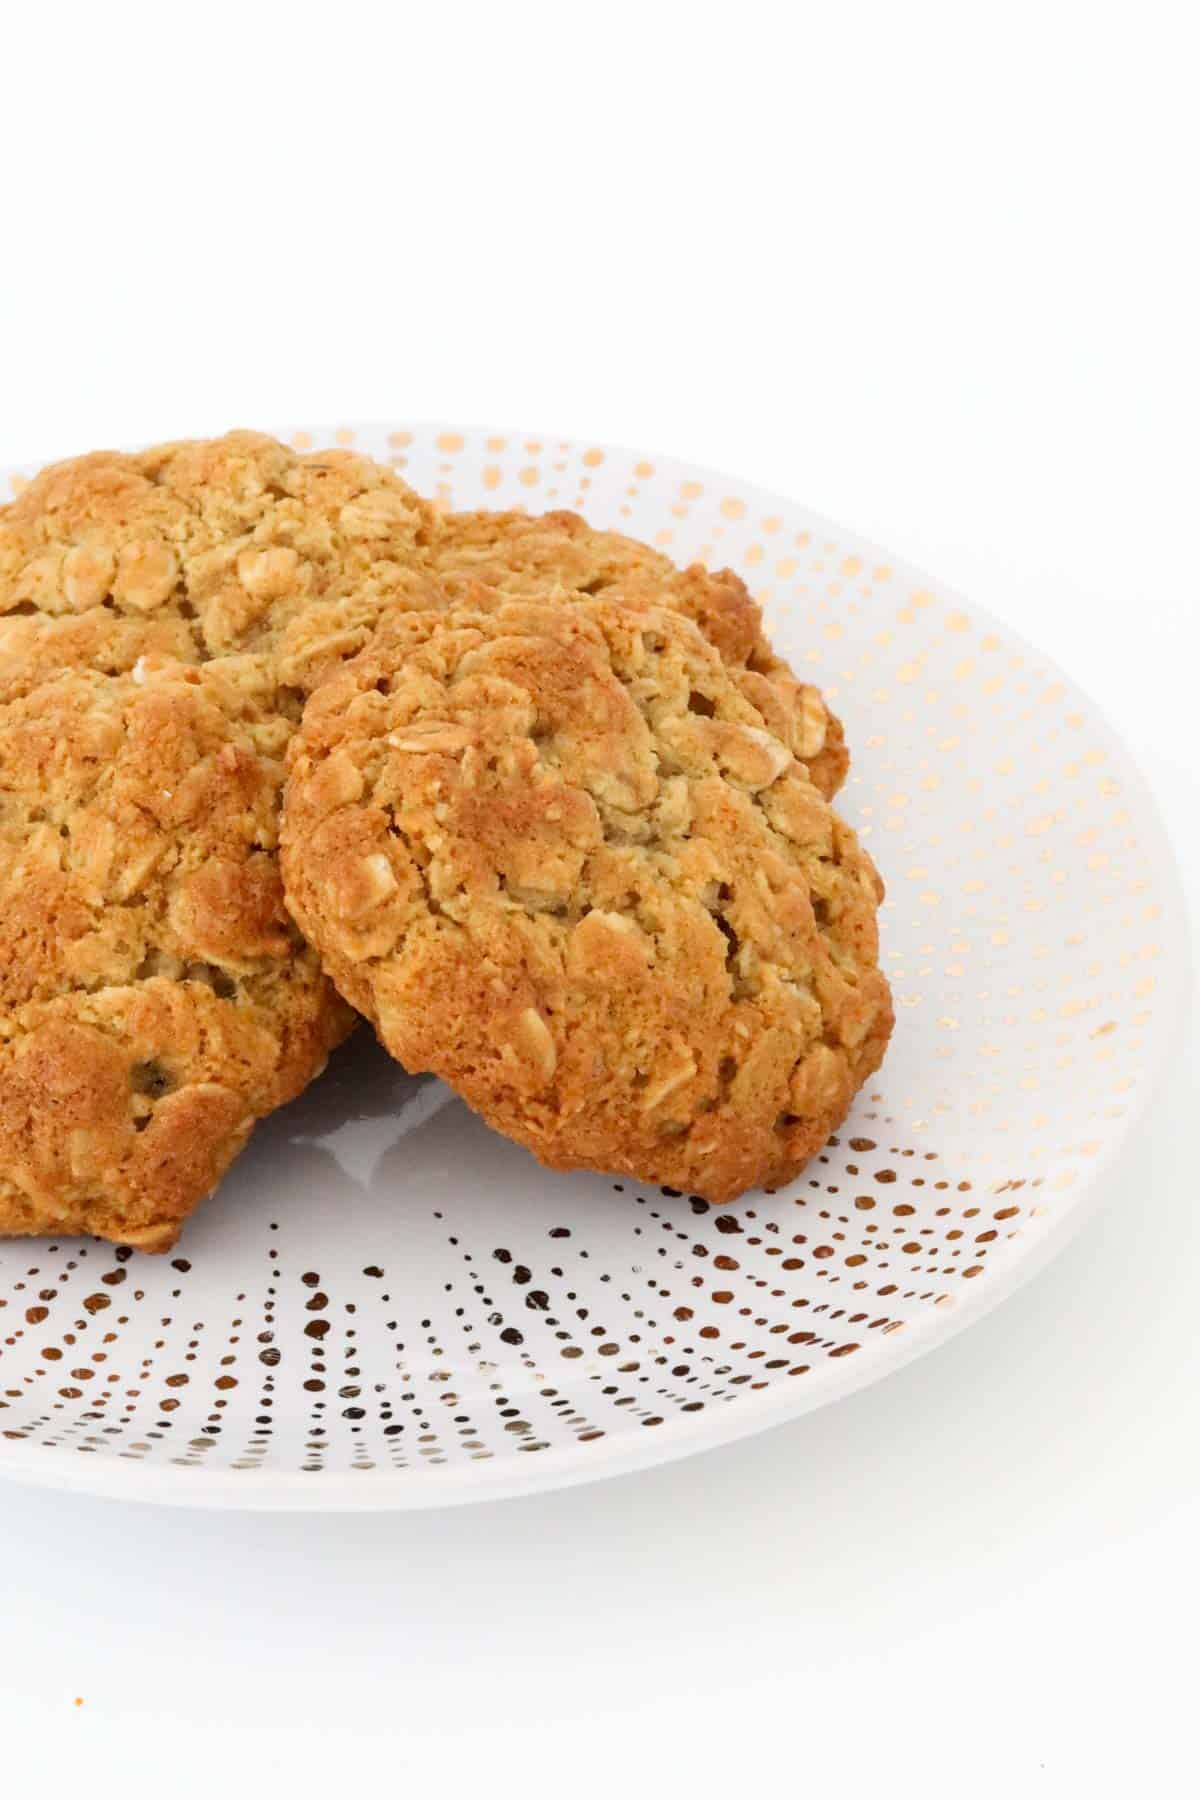 A plate of ANZAC biscuits made in a Thermomix.